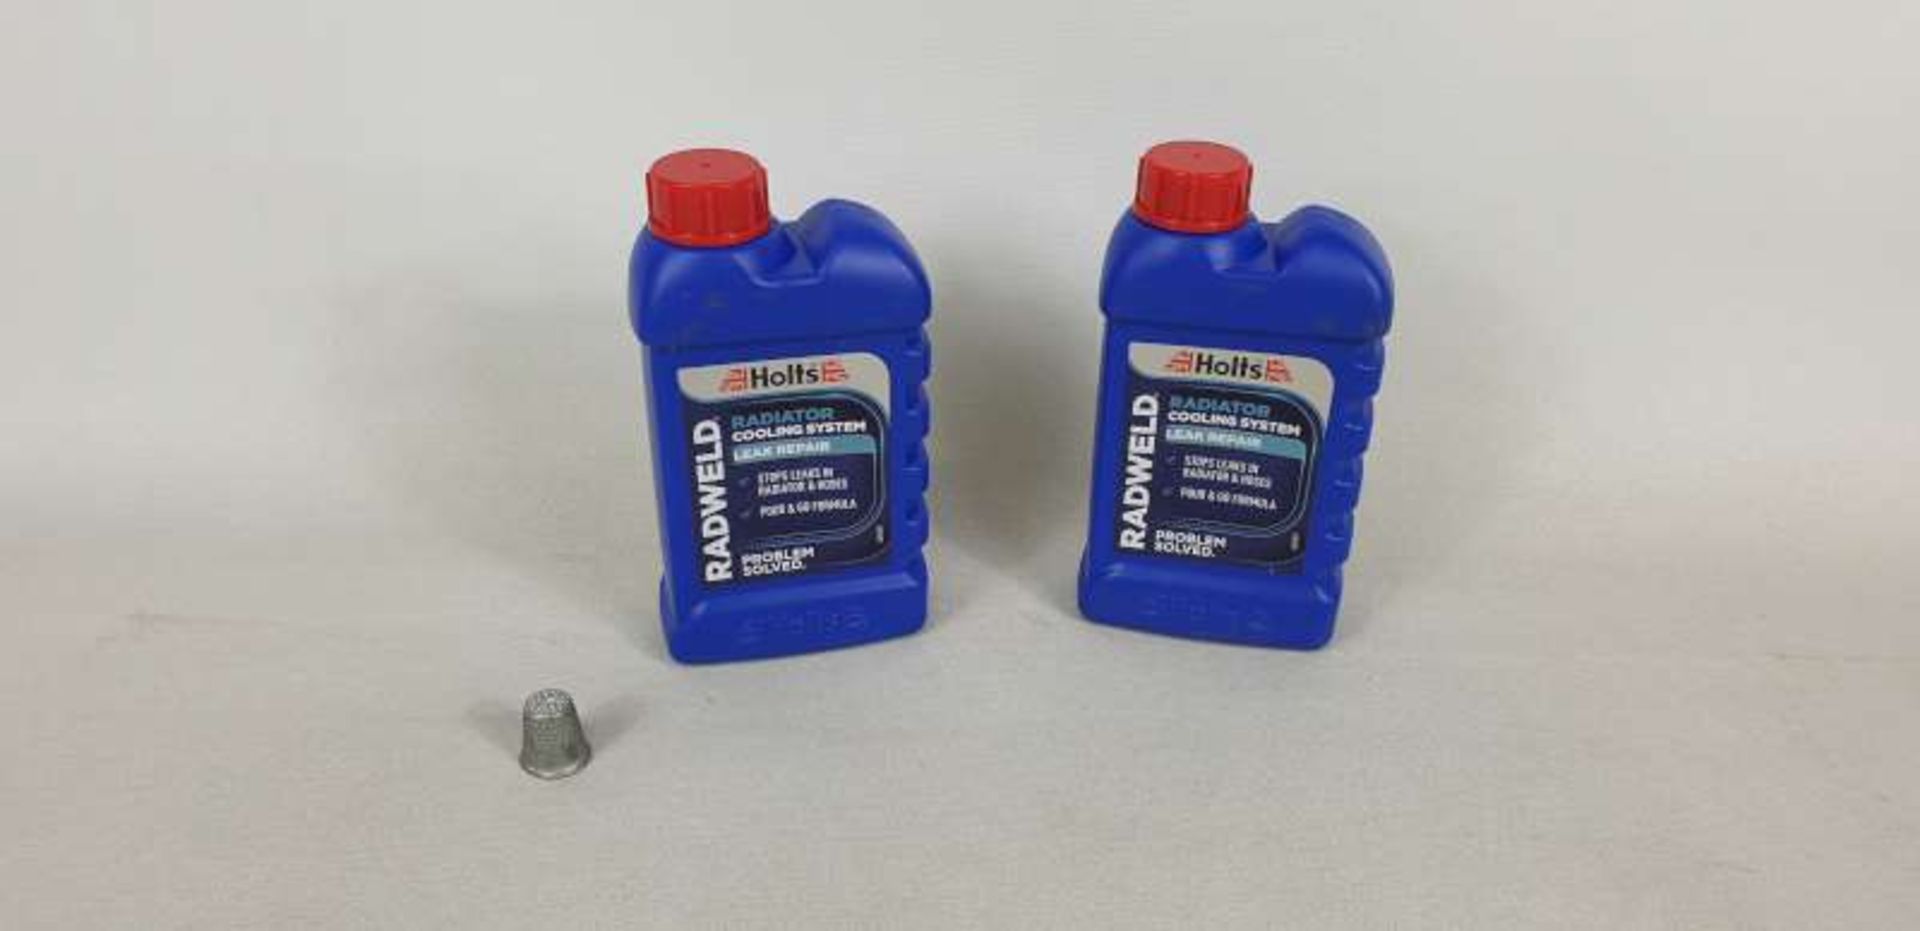 96 X 250ML BOTTLES OF HOLTS RADWELD IN 8 PACKS